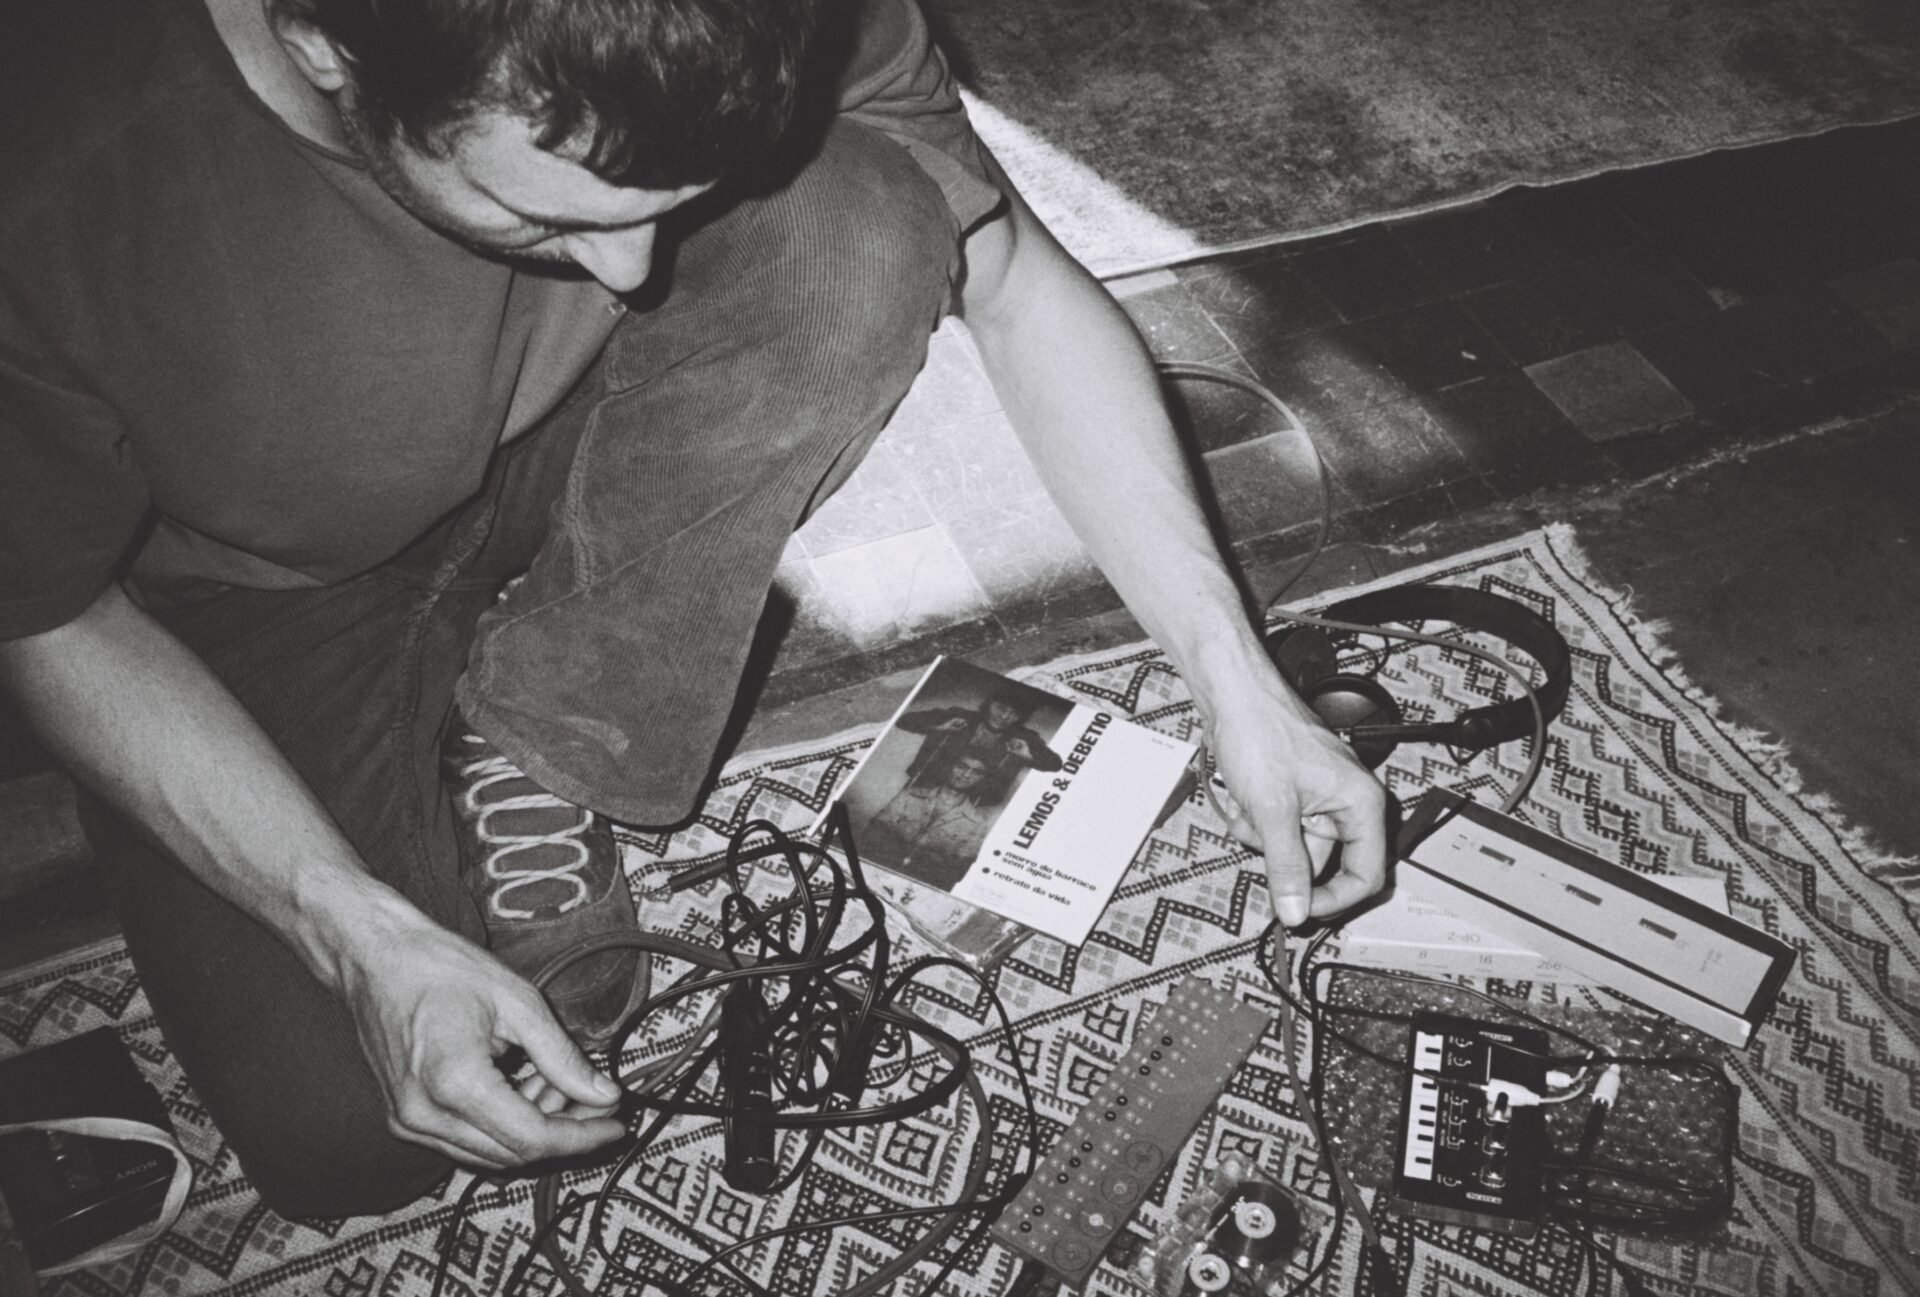 A black and white photo of man lying on the ground. He has wires in his hands. There are two rugs on the floor with headphones, cassette tape and music equipment on them.